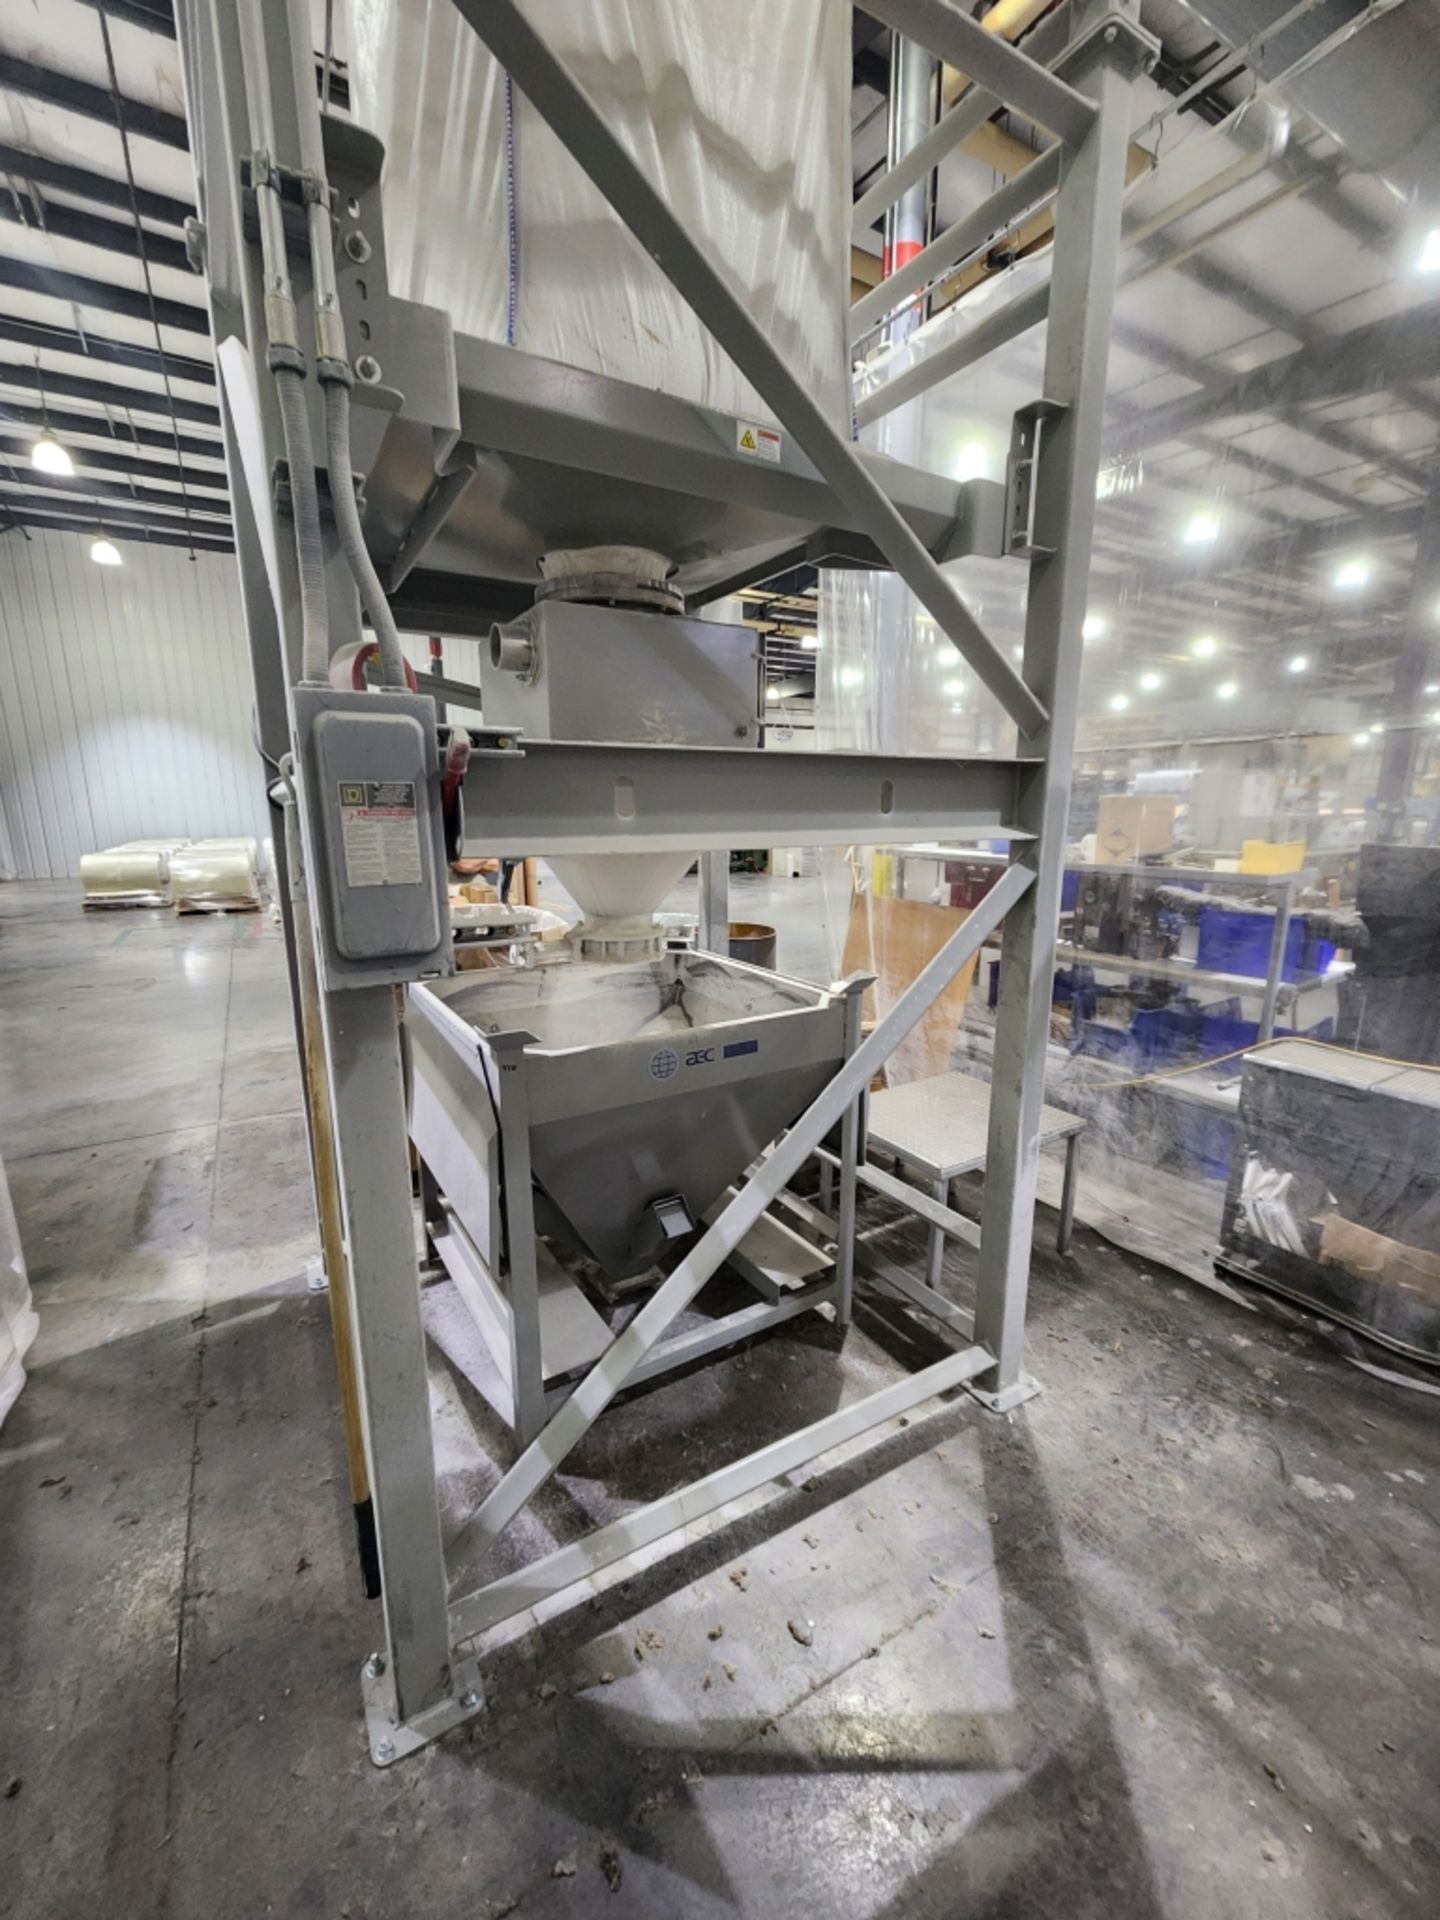 AEC bulk bag unloader system, Model: A248675-01C SN: E101810227-3-1, with five spare bins - Image 4 of 8